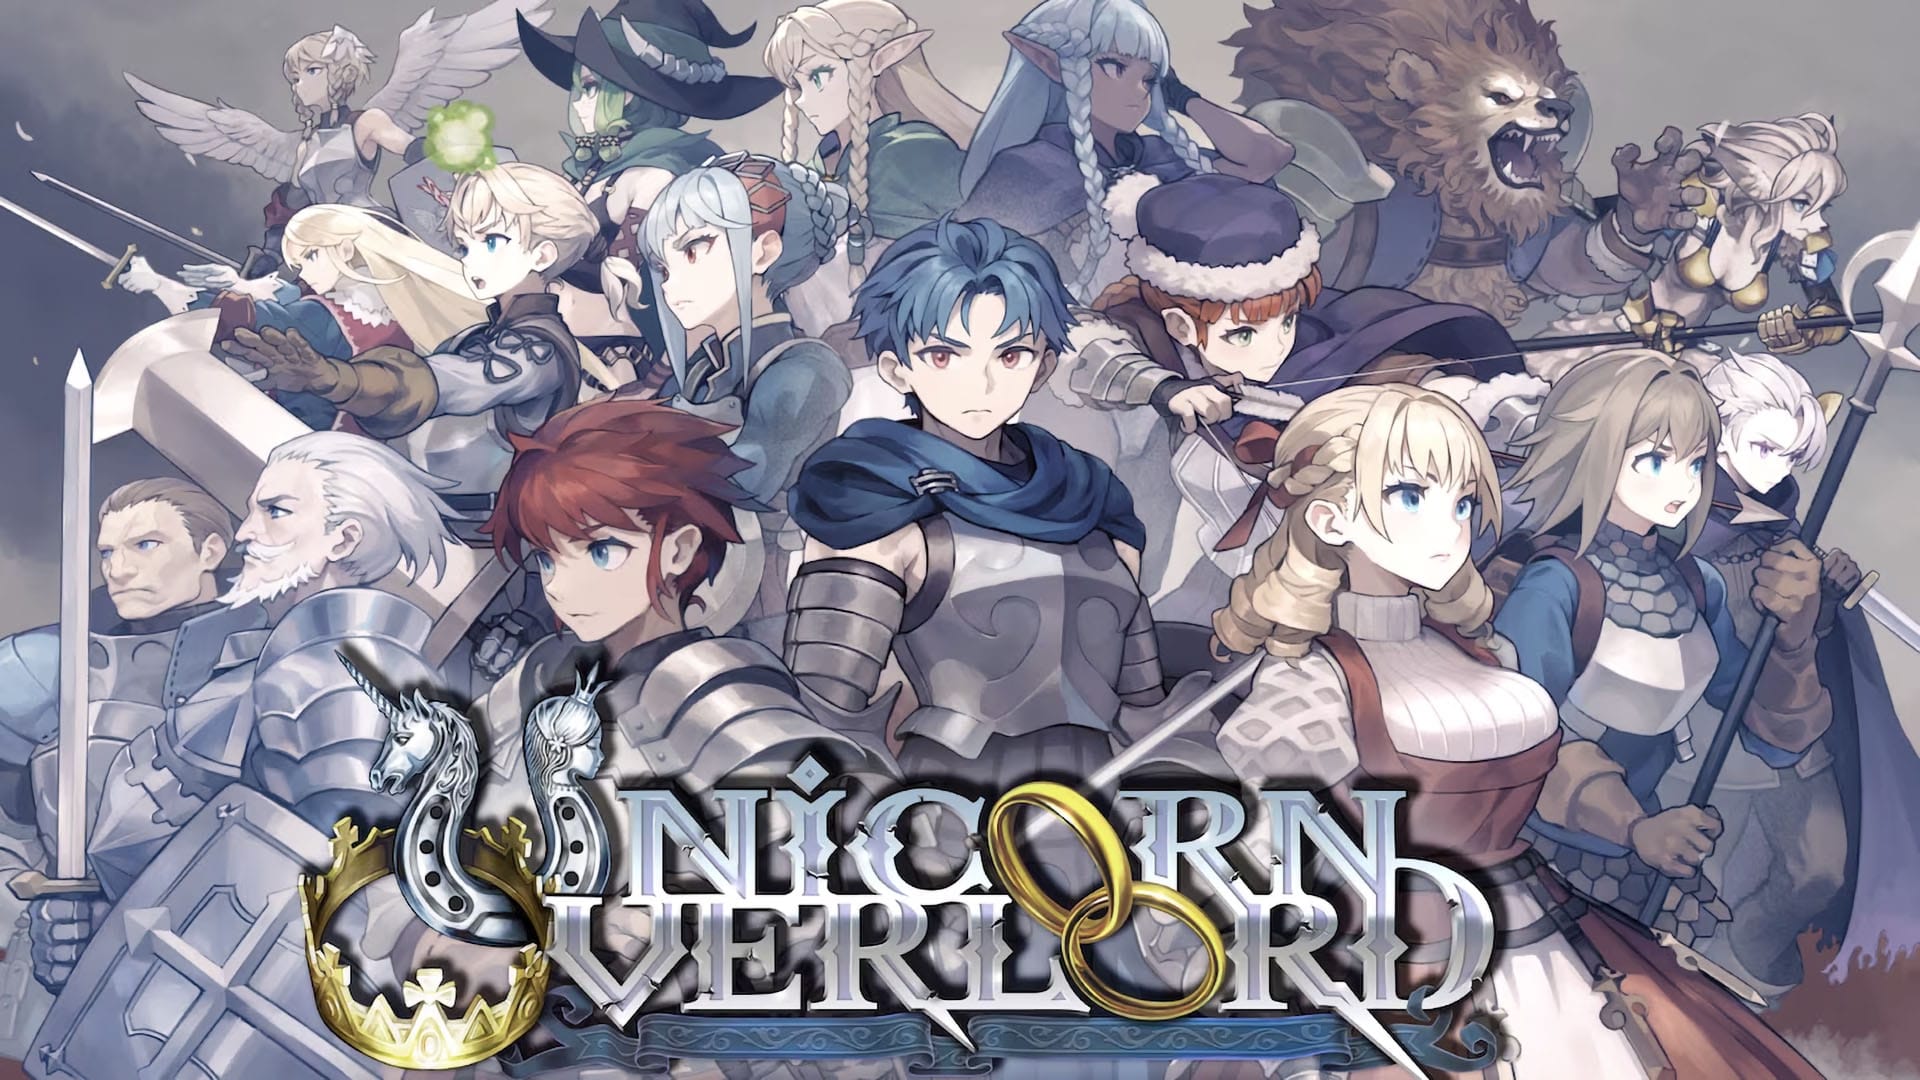 Unicorn Overlord by Vanillaware Reveals Gorgeous Screenshots, New Characters, and Battle Details